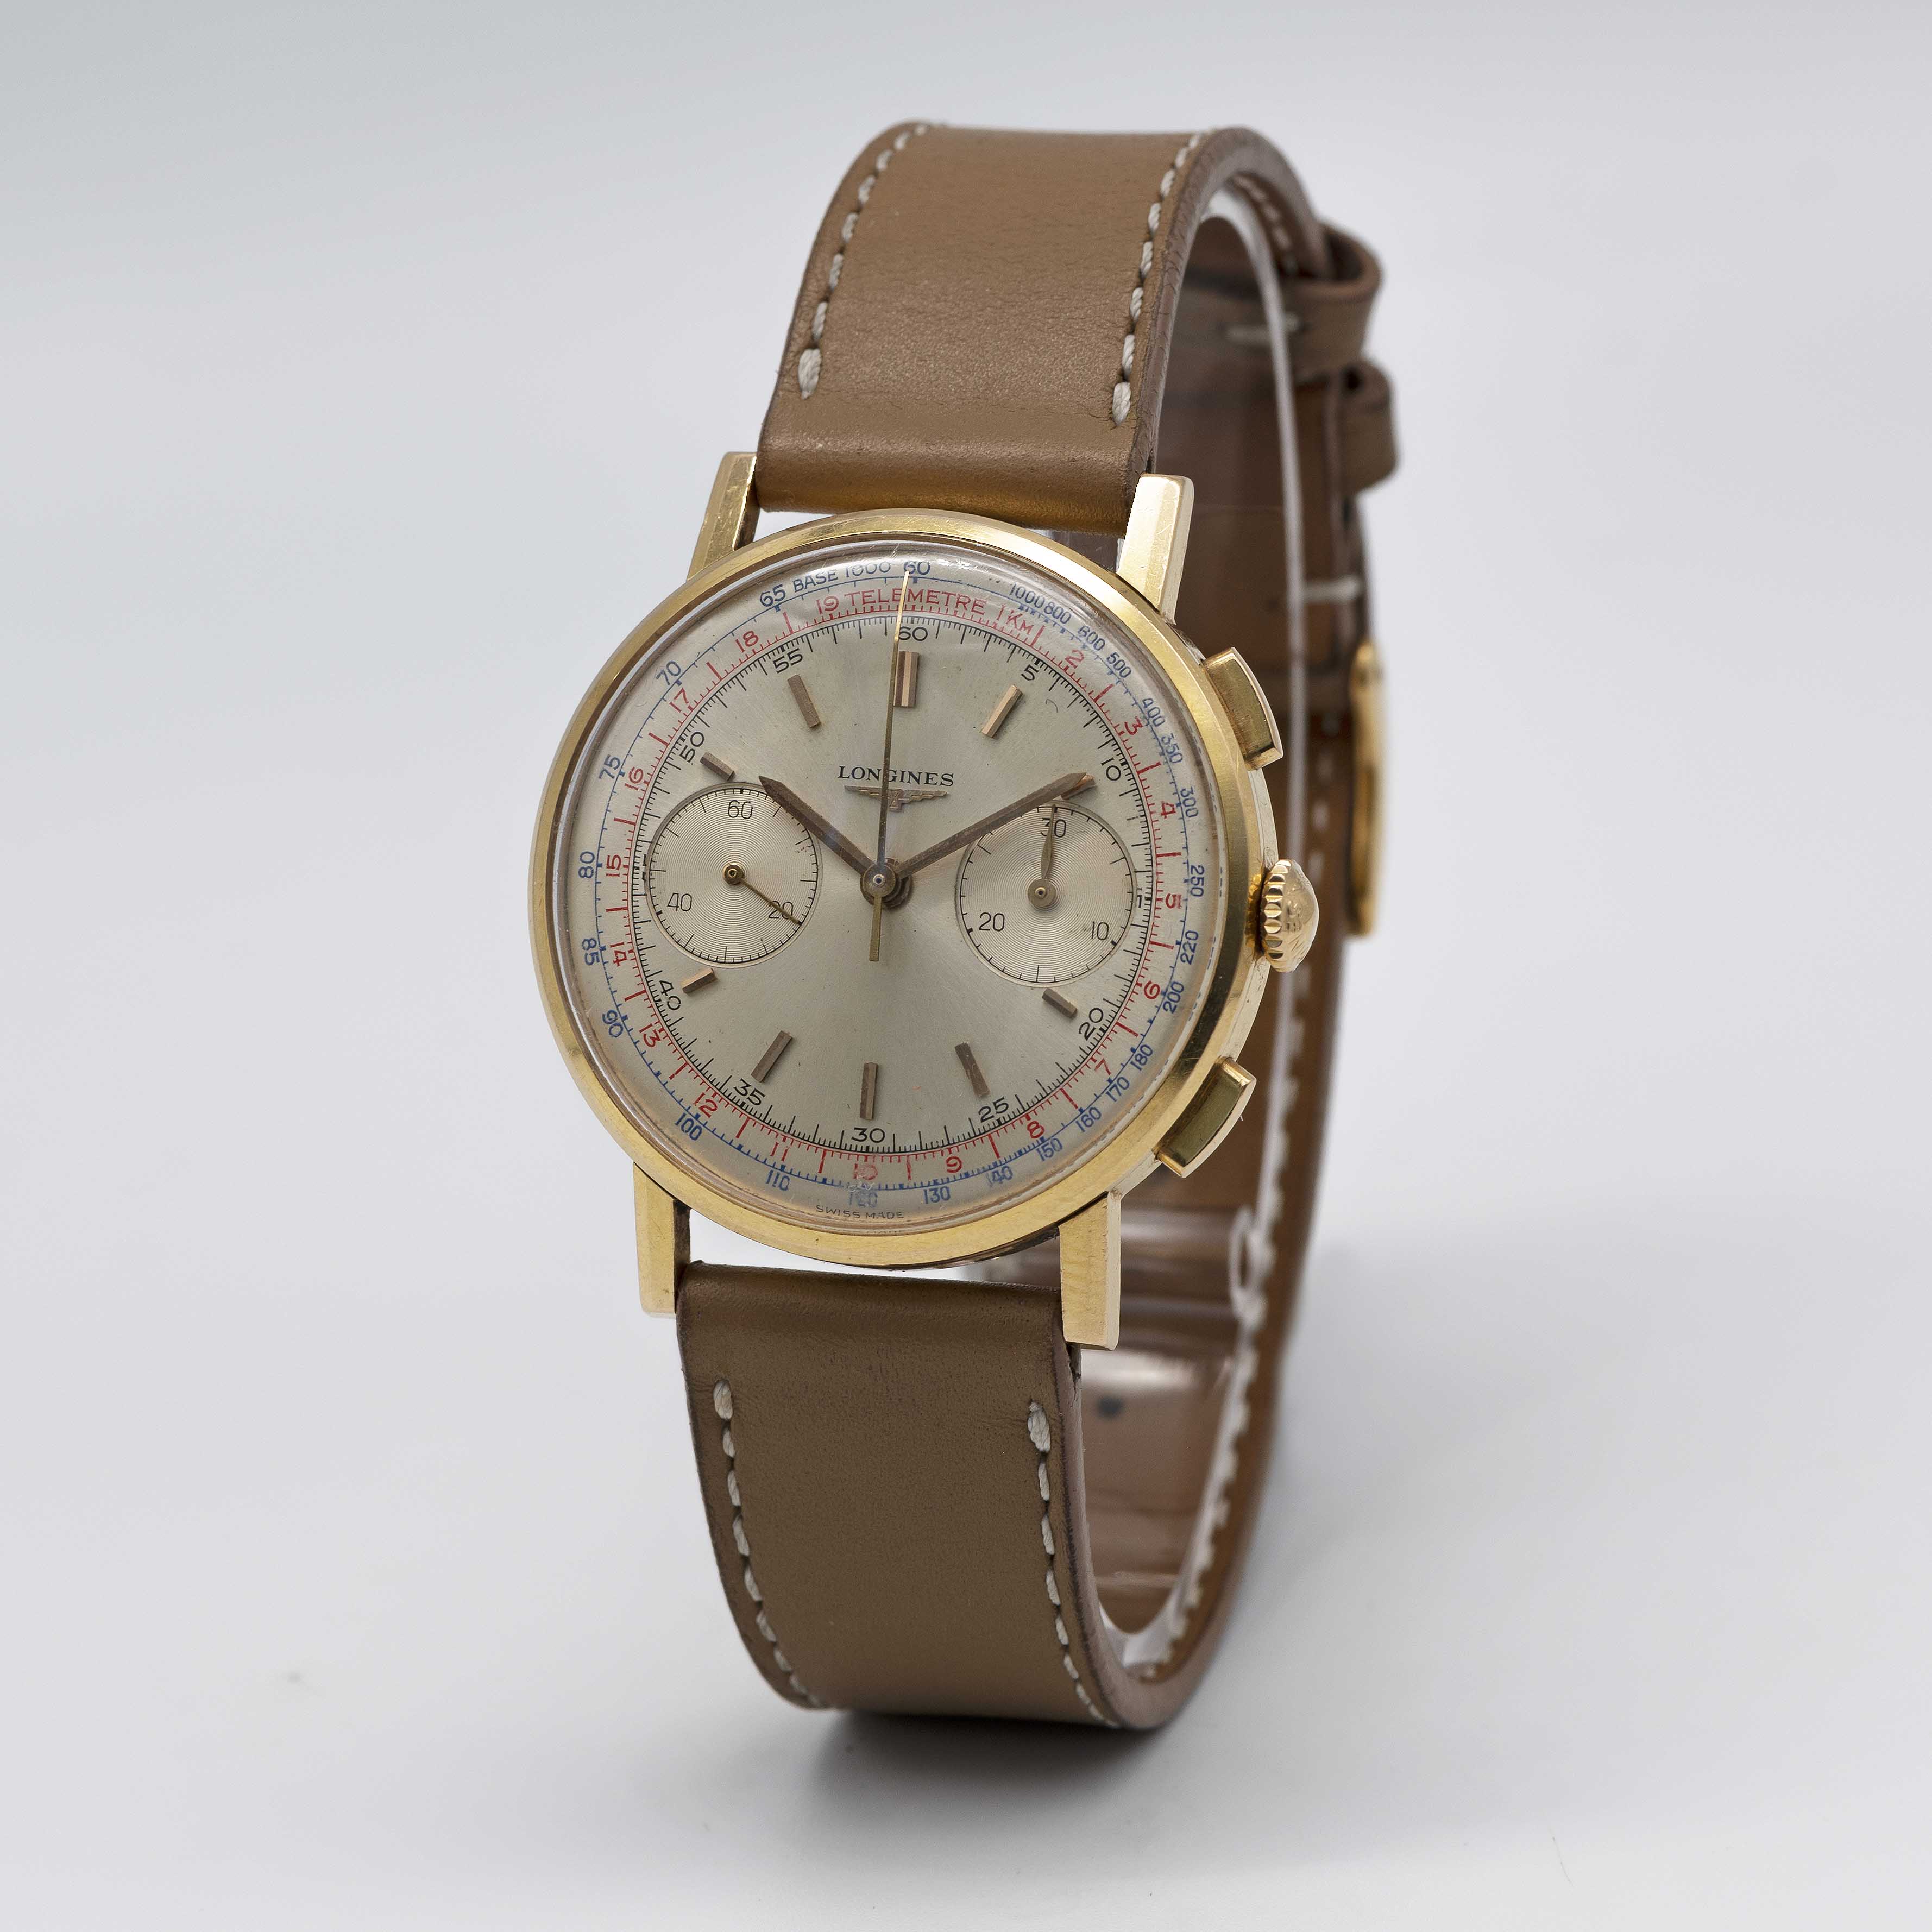 A GENTLEMAN'S 18K SOLID YELLOW GOLD LONGINES FLYBACK CHRONOGRAPH WRIST WATCH DATED 1969, REF. 7414 - Image 4 of 9